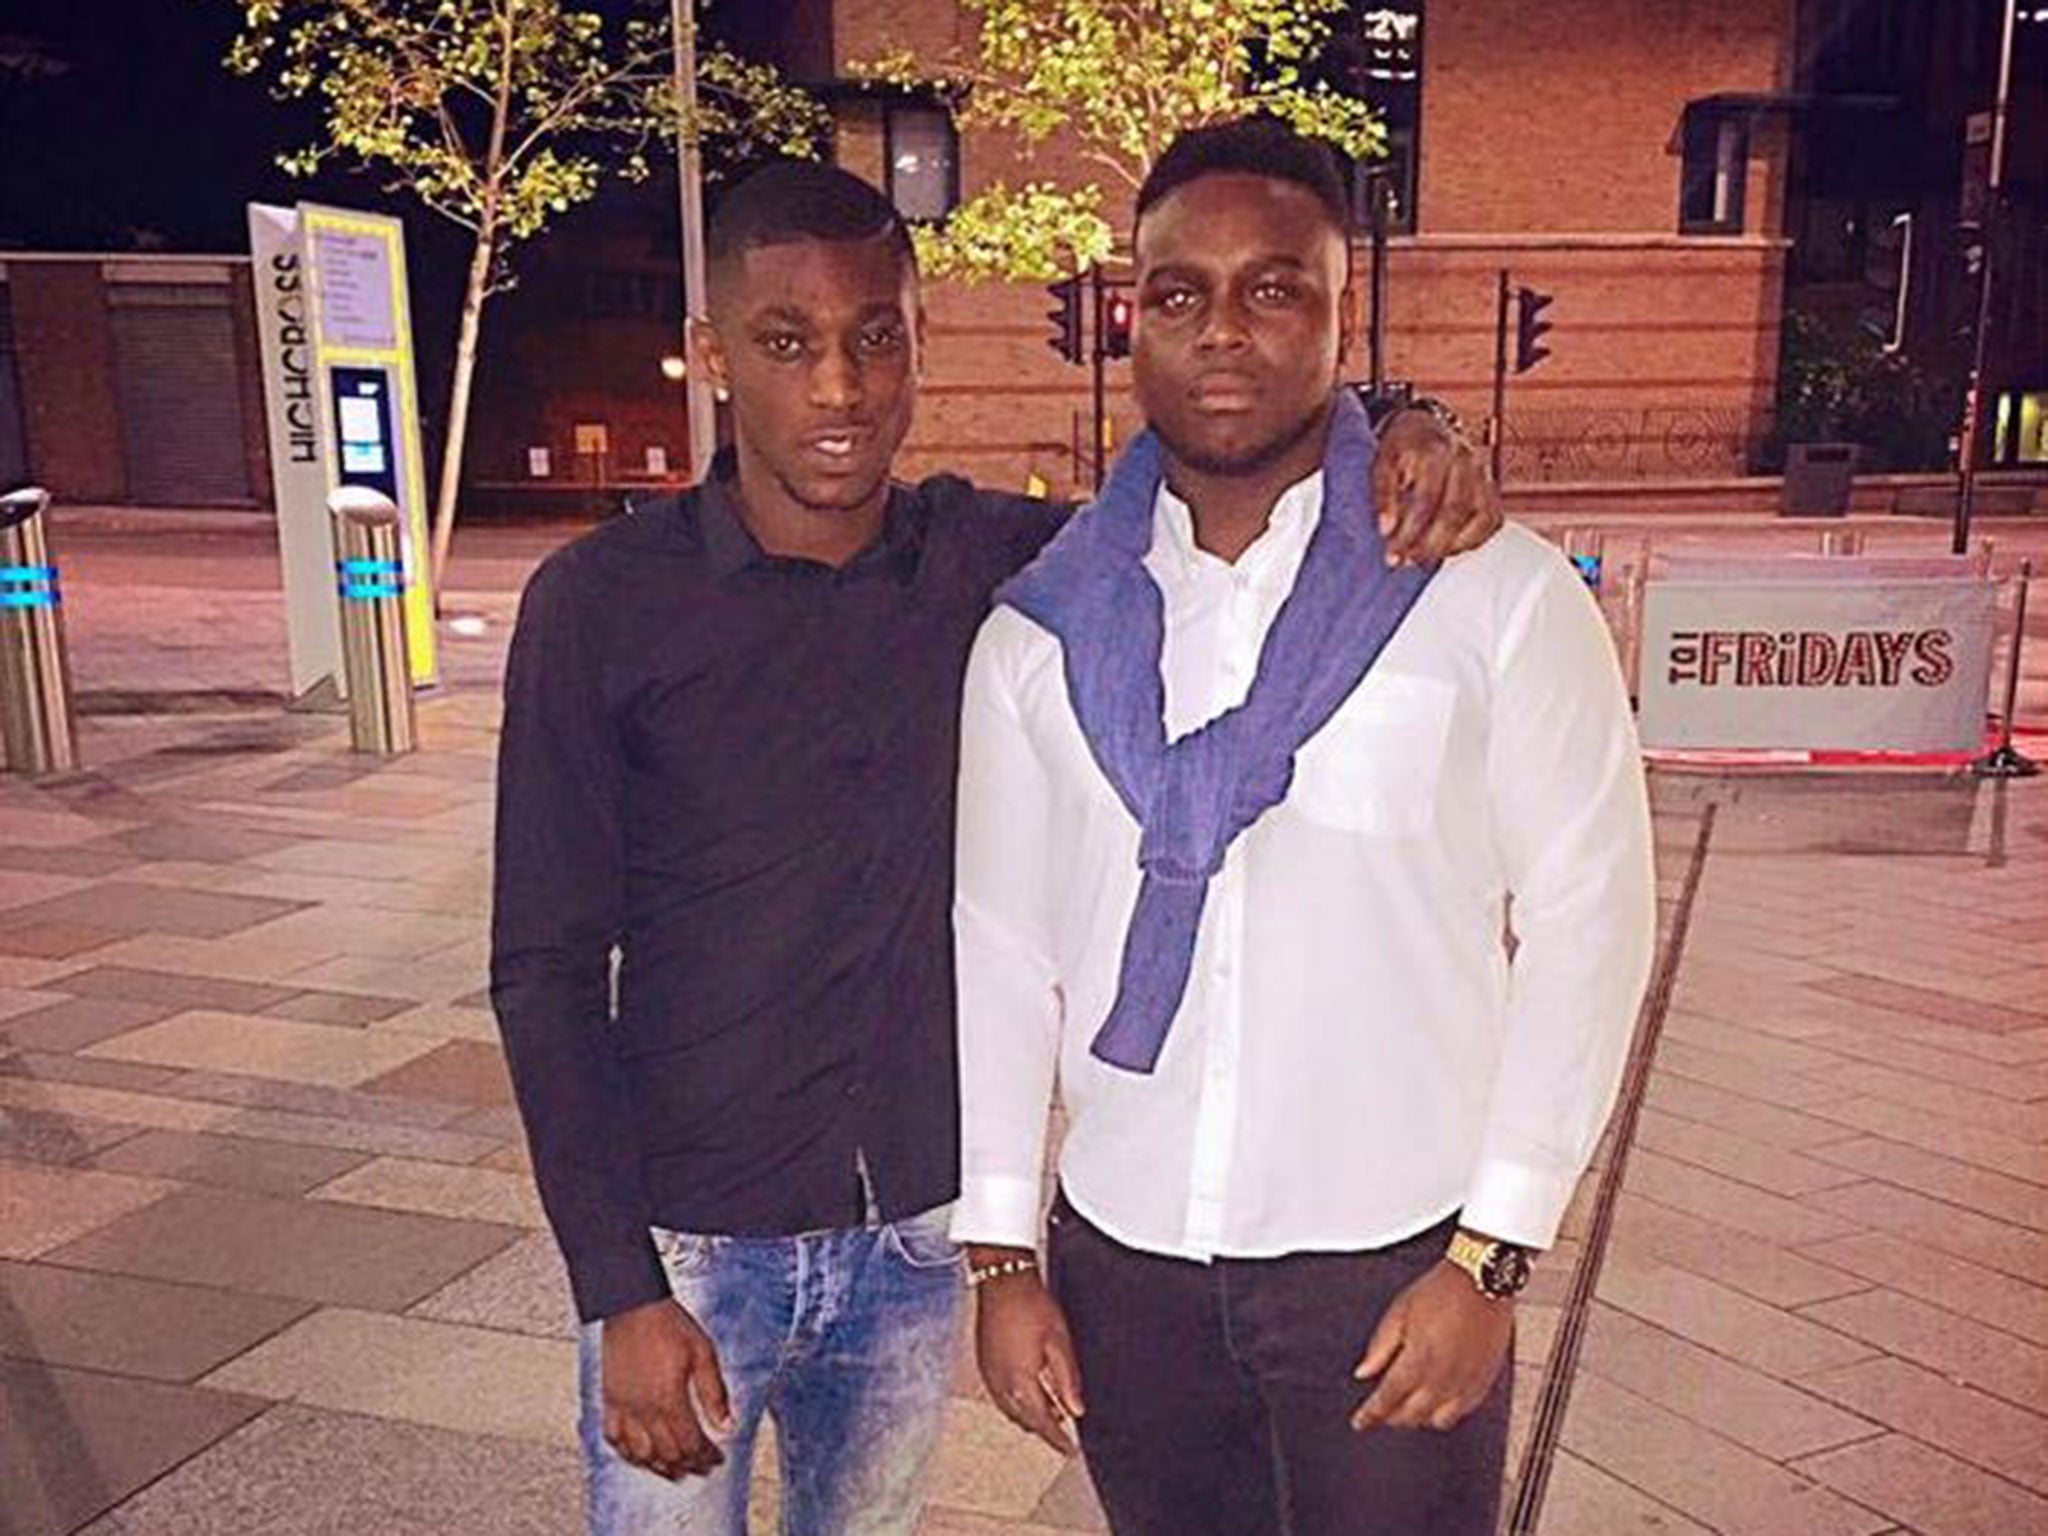 Kosi Orah (right) with a friend in Leicester to celebrate his birthday